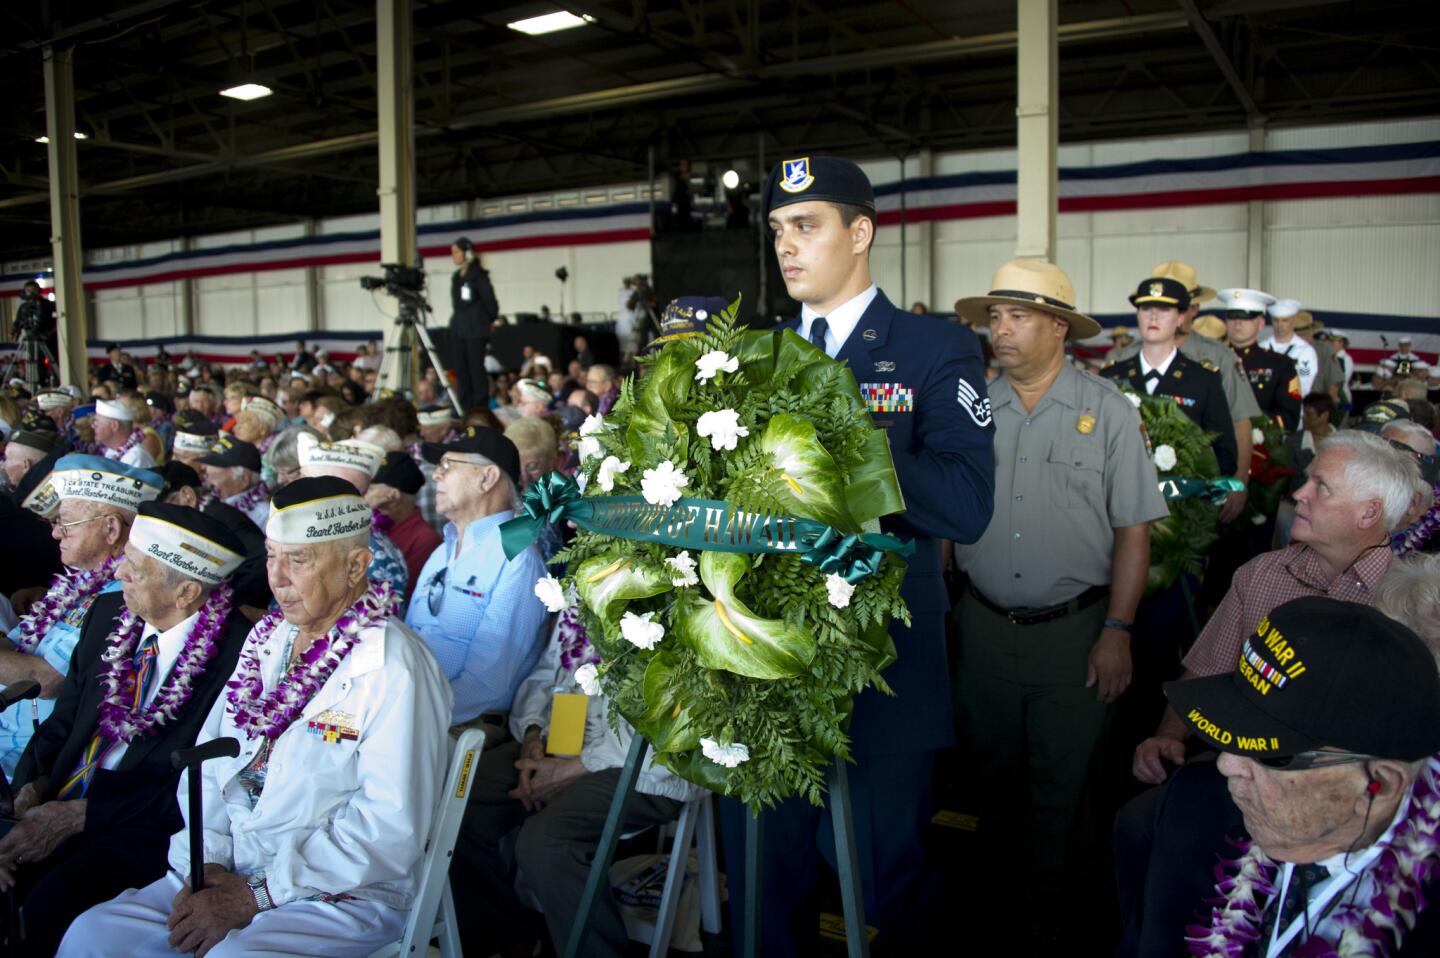 Air Force Staff Sergeant Mose Matila stands at a wreath as Ranger Joseph Borja stands behind him during a wreath laying ceremony to commemorate 75th anniversary of the attack on Pearl Harbor in Honolulu.